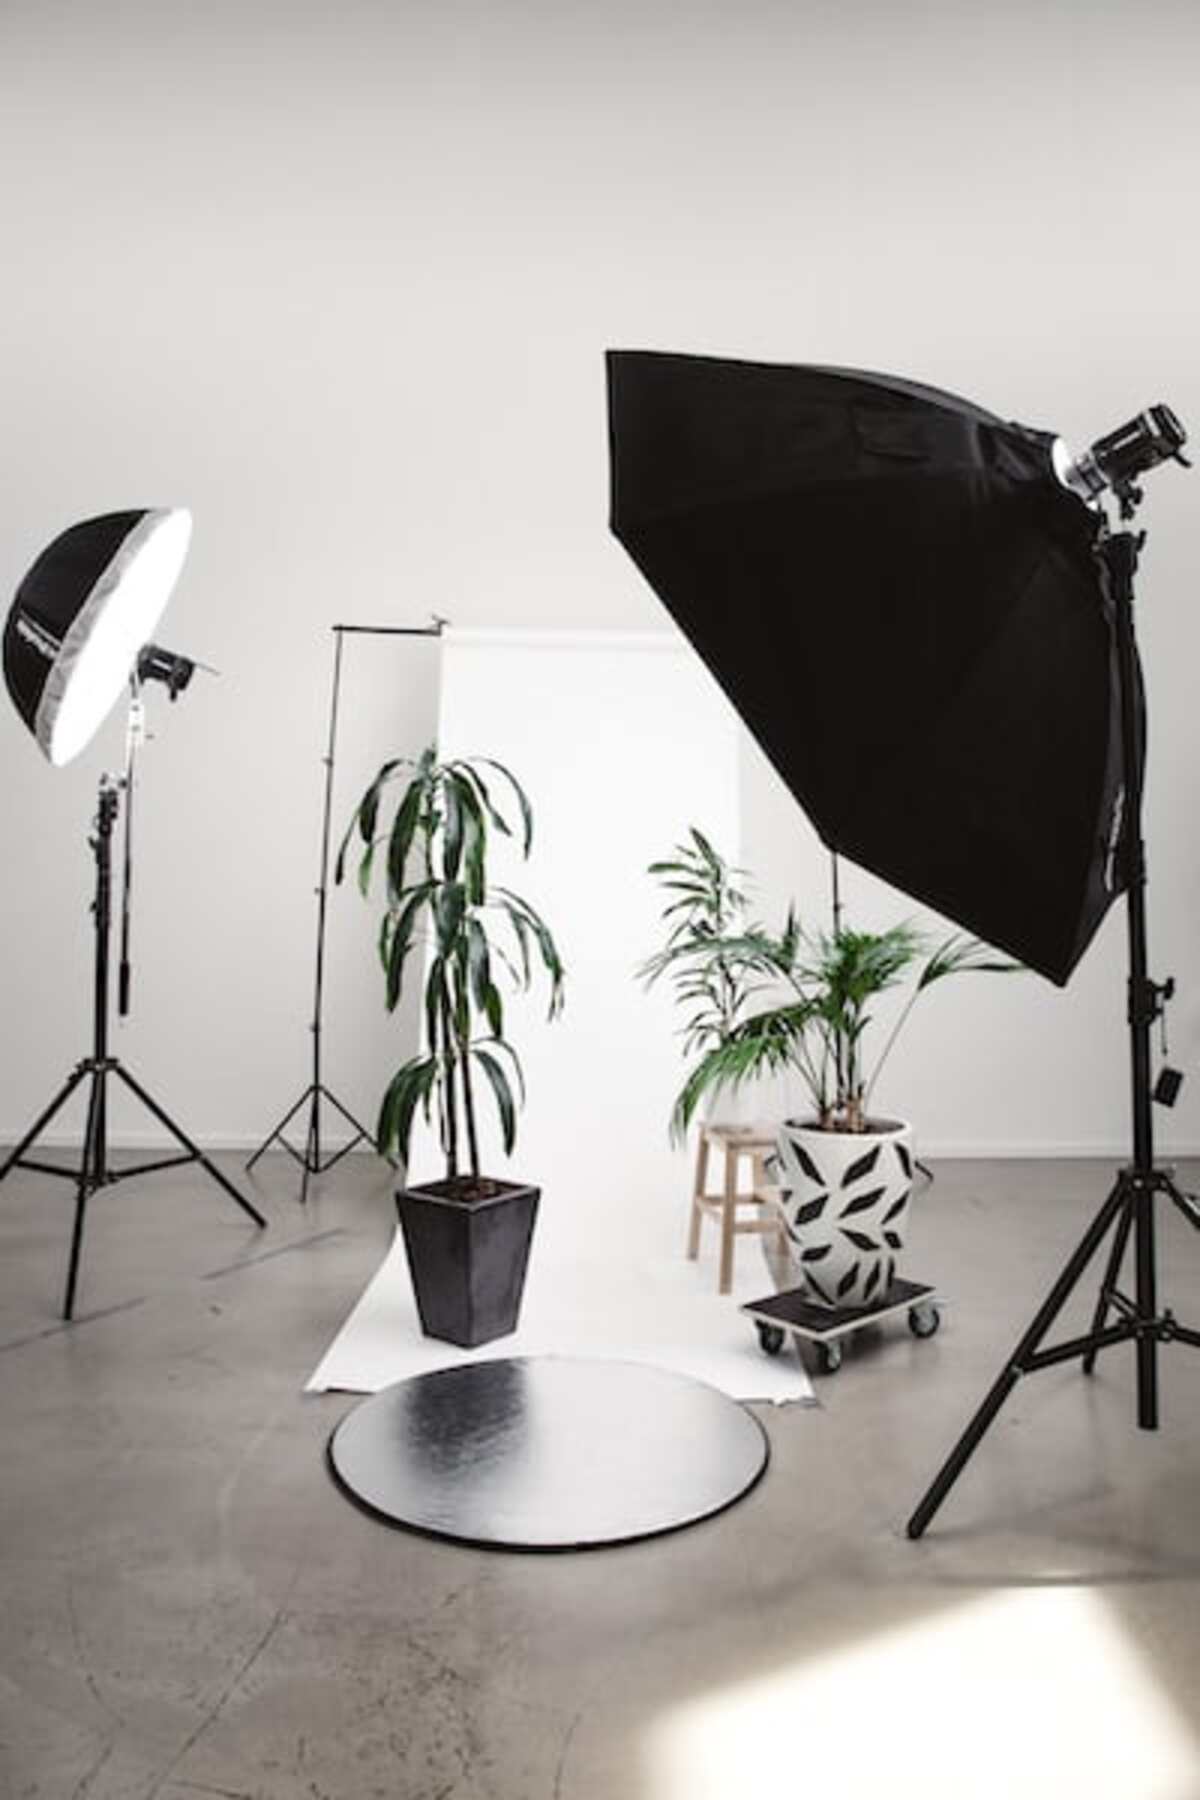 Rent Lighting equipment for Photo and Video Productions